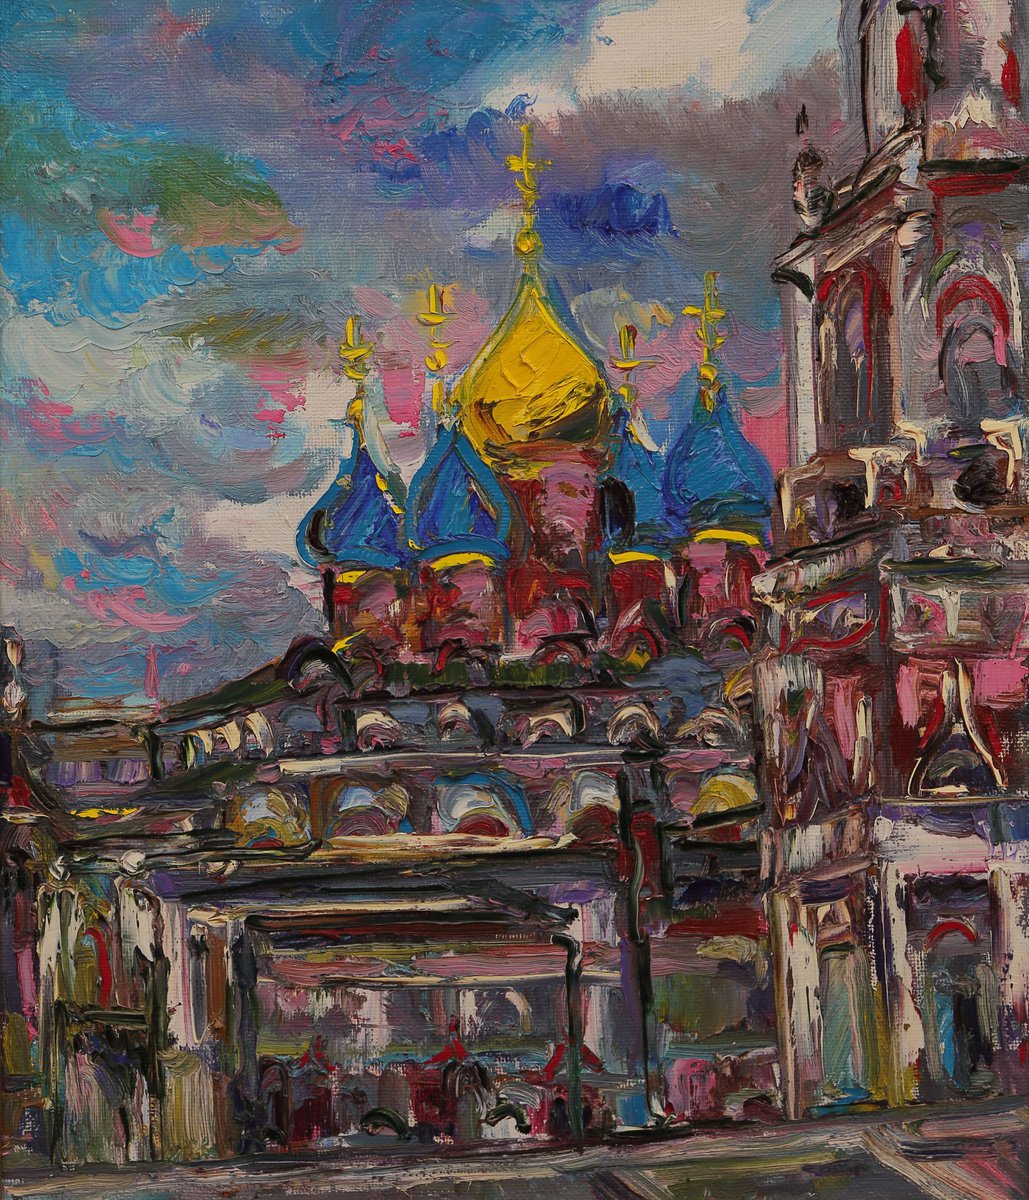 MOSCOW. CLOUDS OVER VARVARKA - Cityscape - Russia church love sky , oil painting by Karakhan